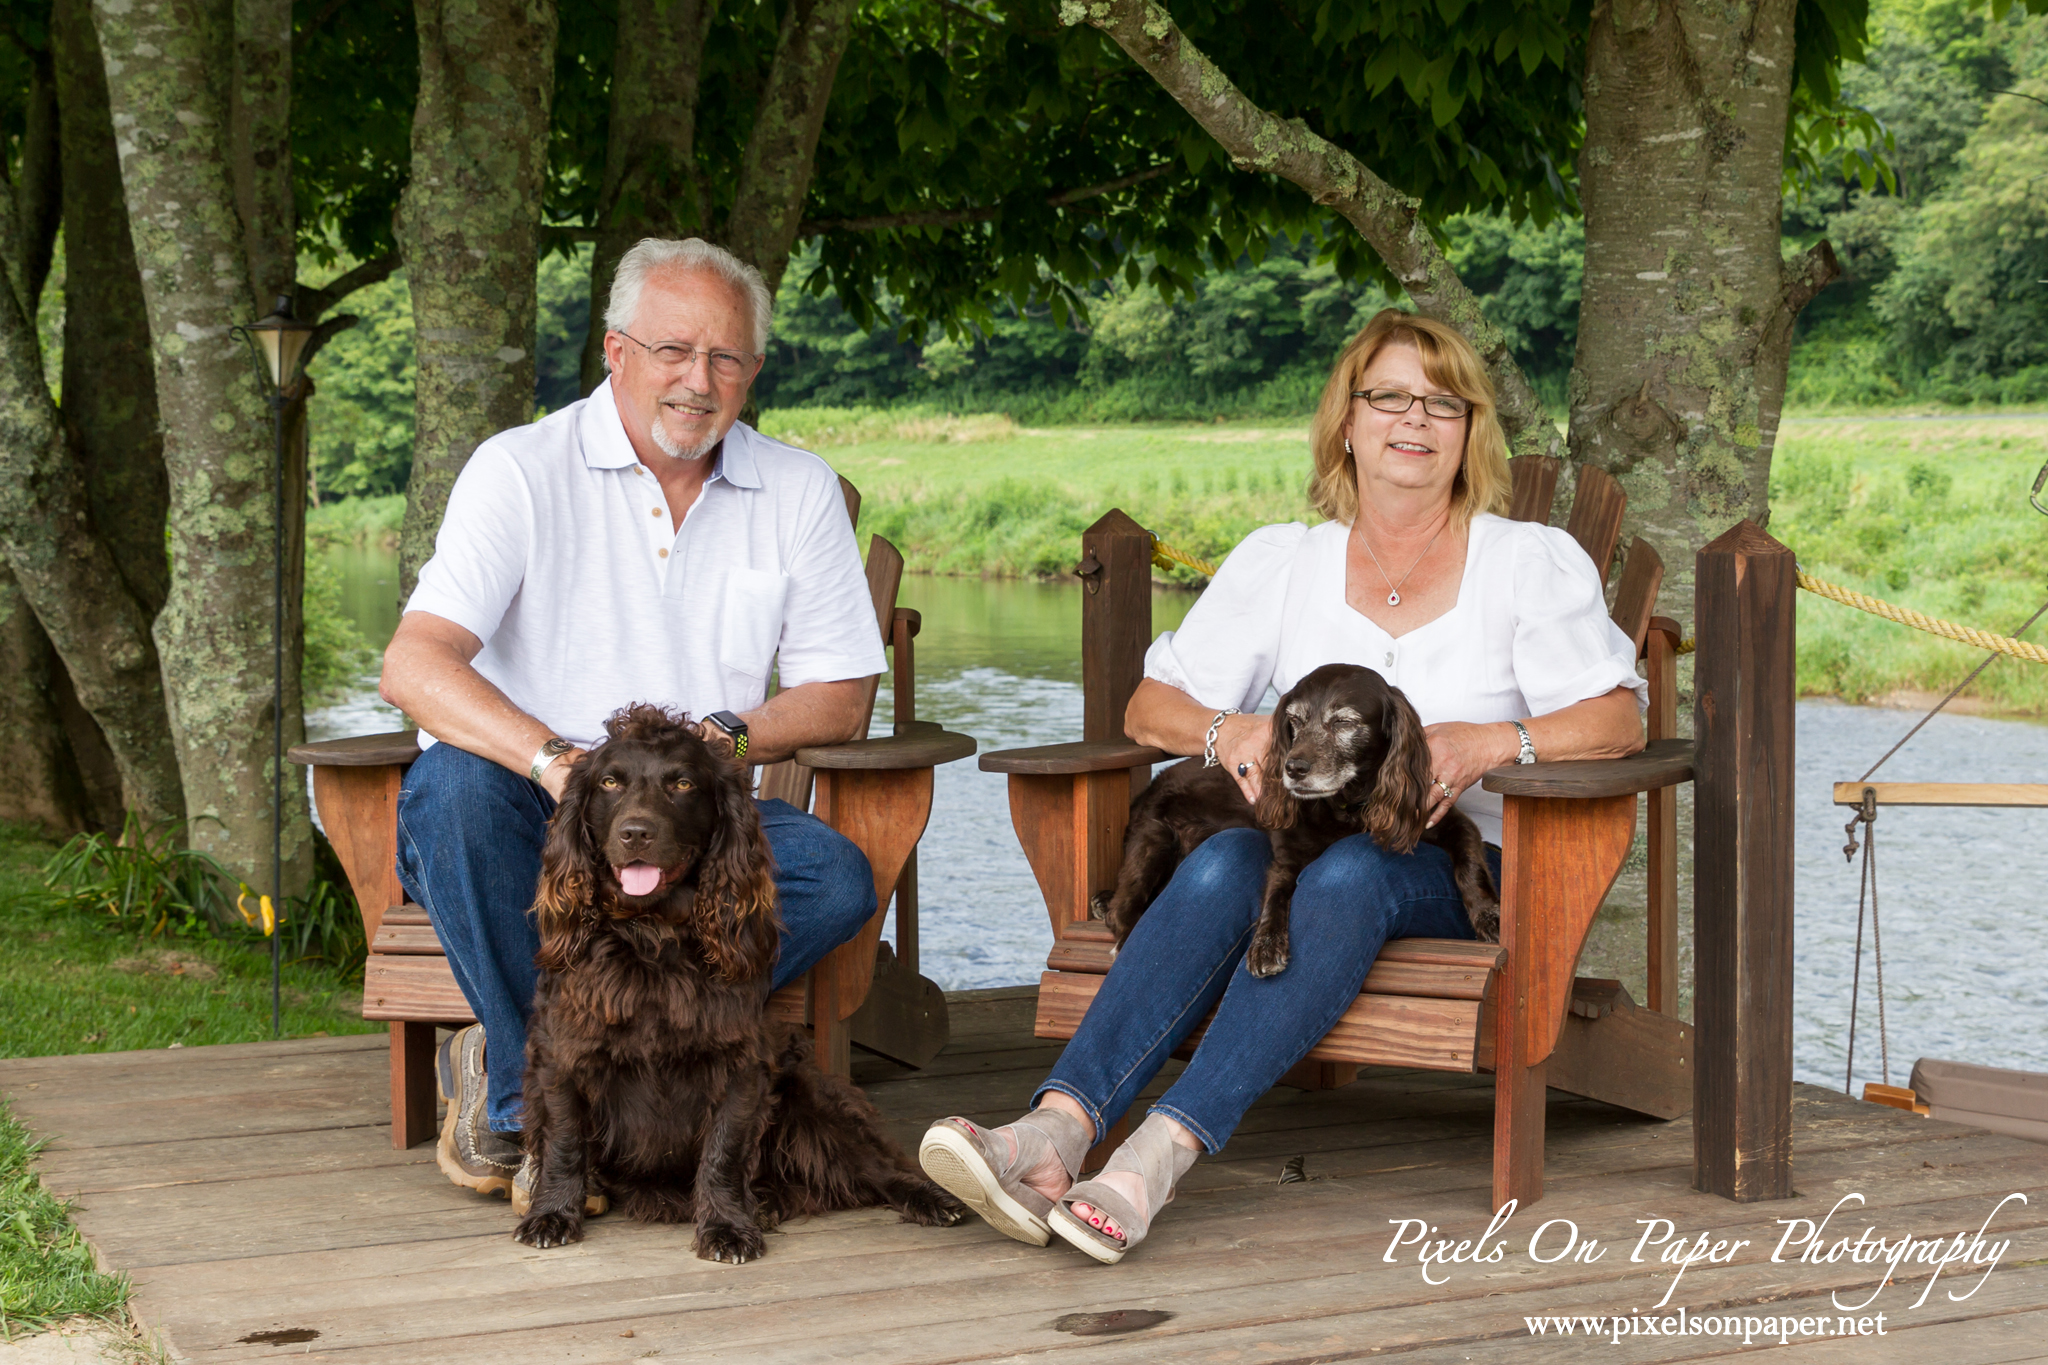 Johnson family and pet outdoor portrait todd nc photographers photo